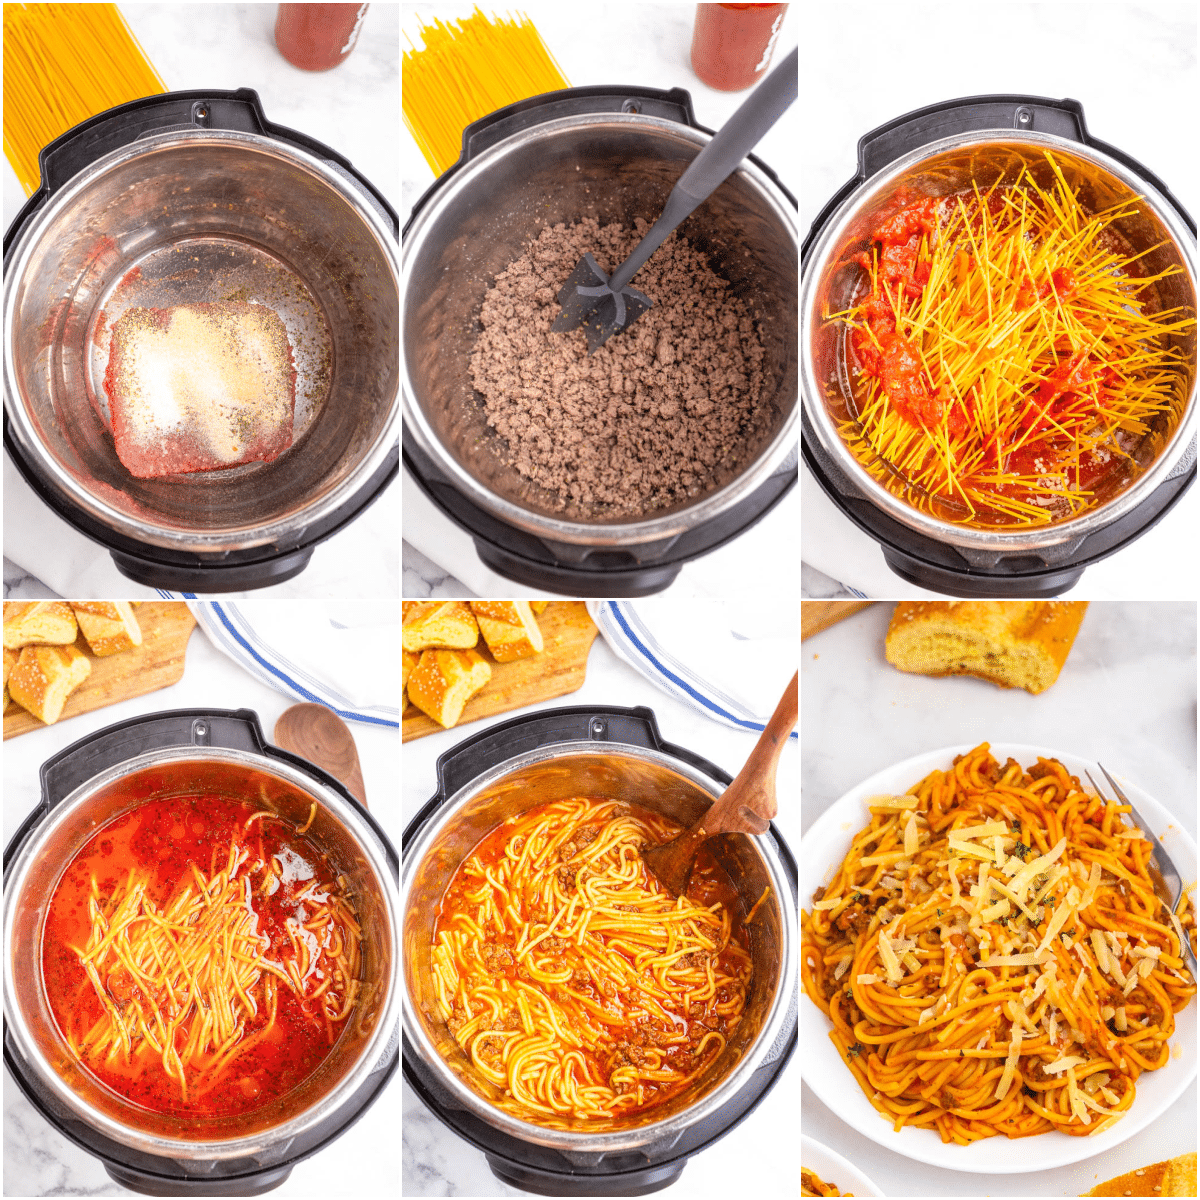 Top down photos of instant pot spaghetti steps.